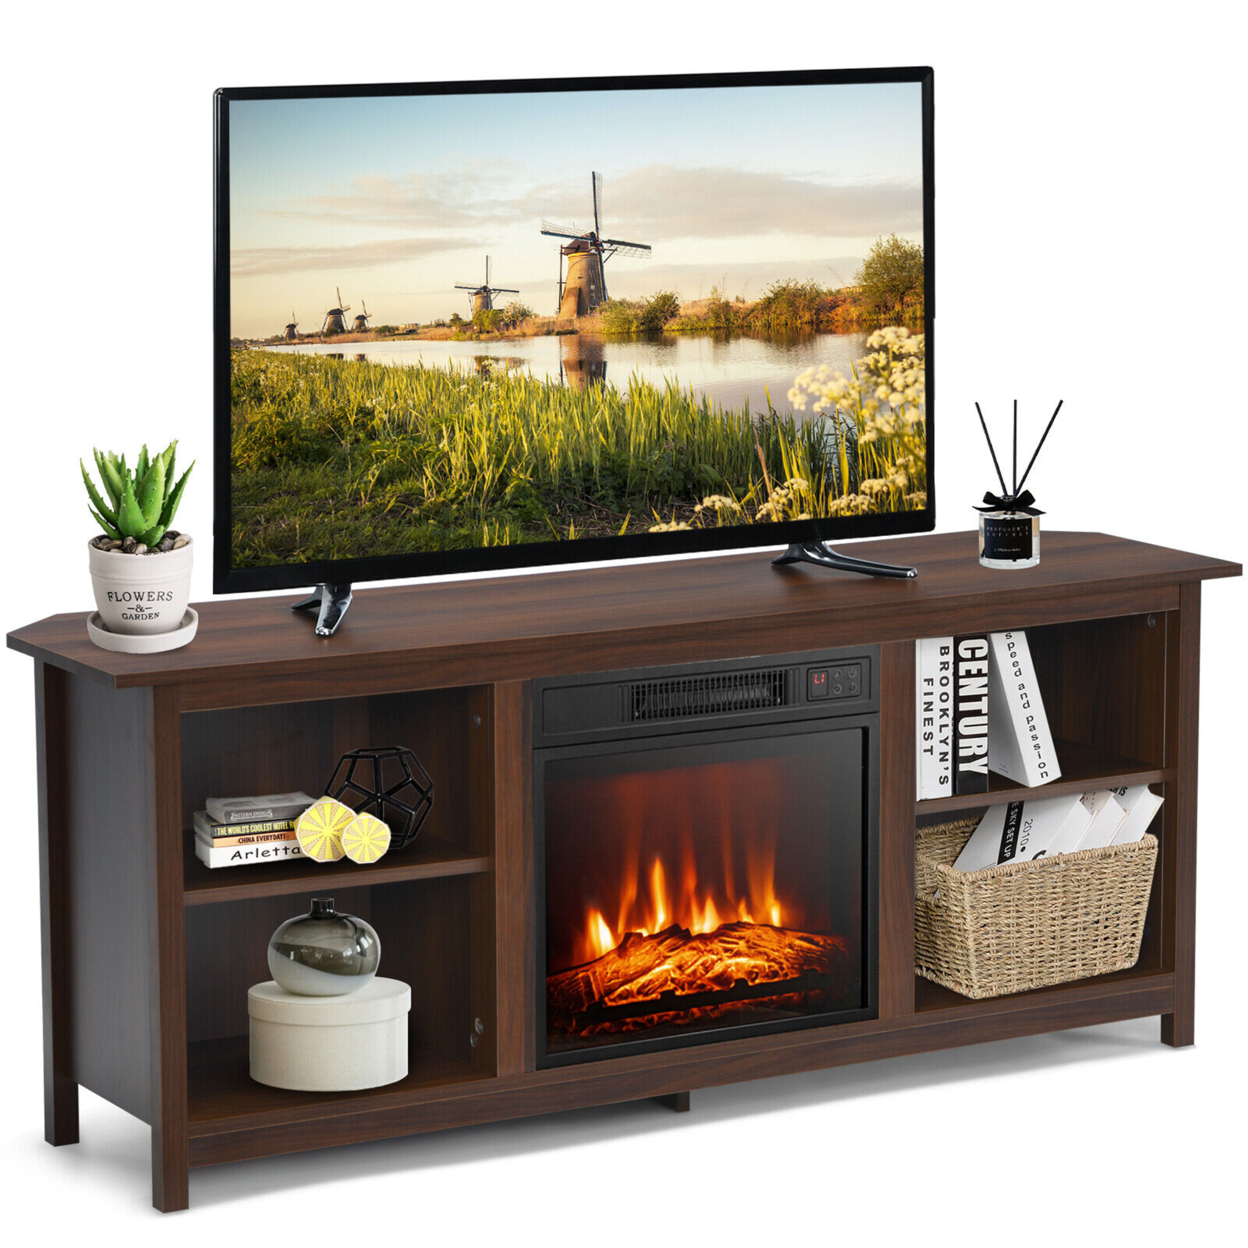 58'' 2-Tier Fireplace TV Stand W/18'' Electric Fireplace Up To 65'' Coffee